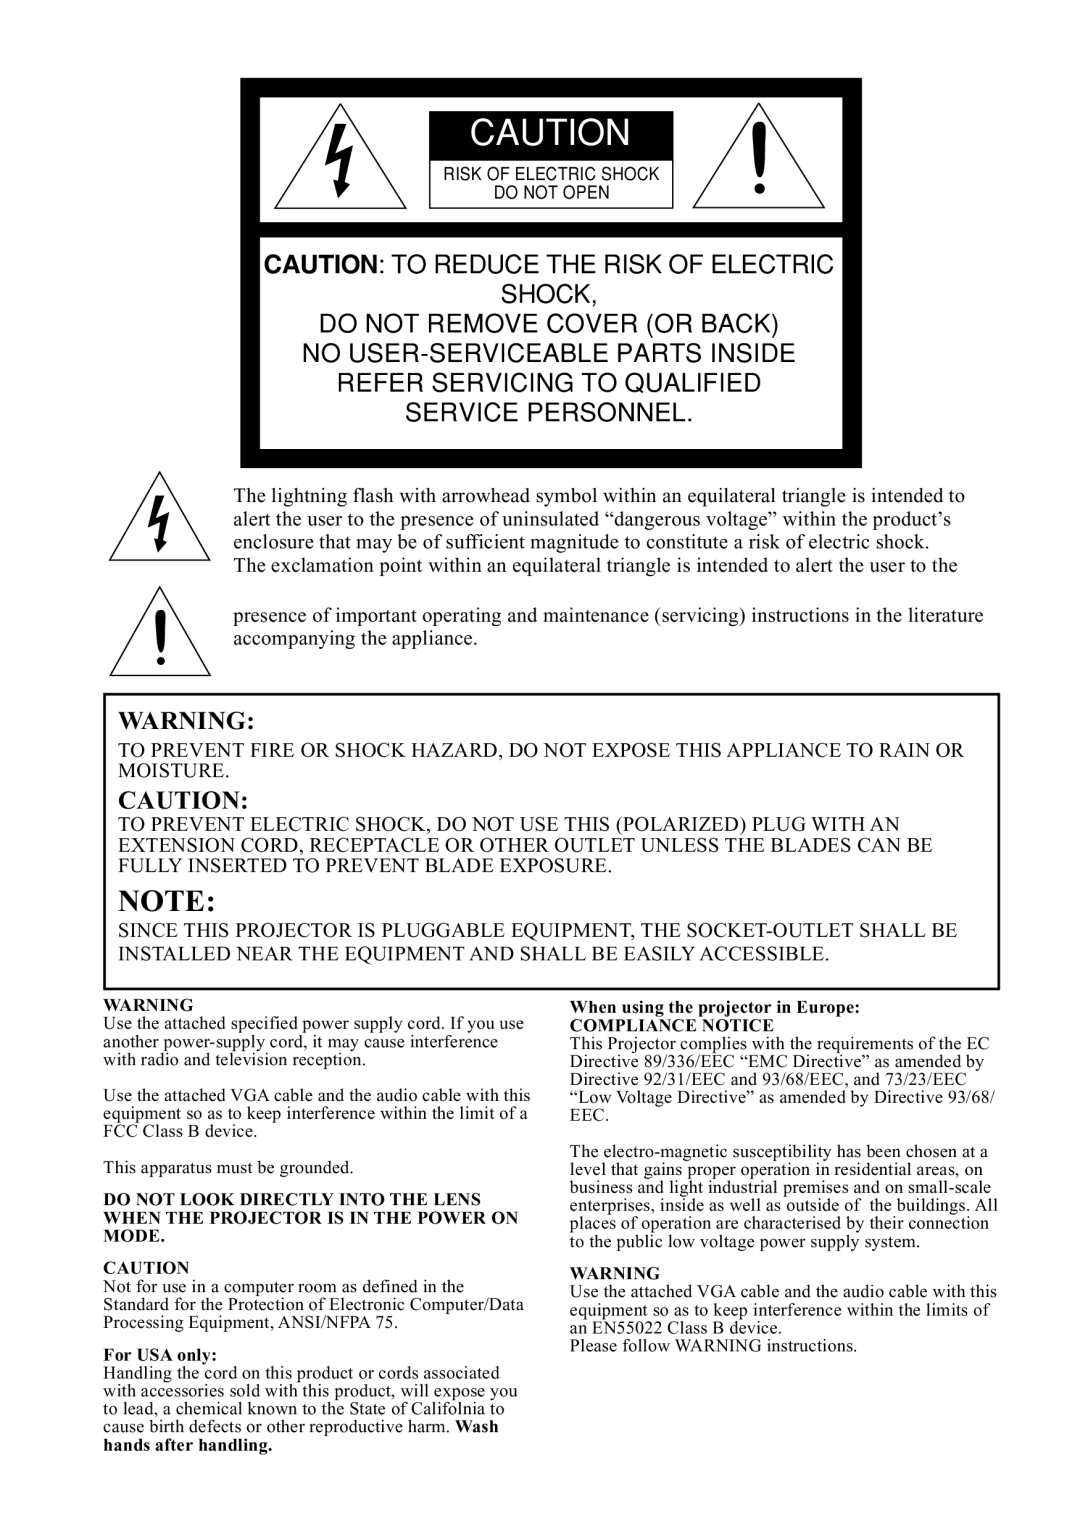 Mitsubishi Electronics SE2U Caution To Reduce The Risk Of Electric Shock, Refer Servicing To Qualified Service Personnel 